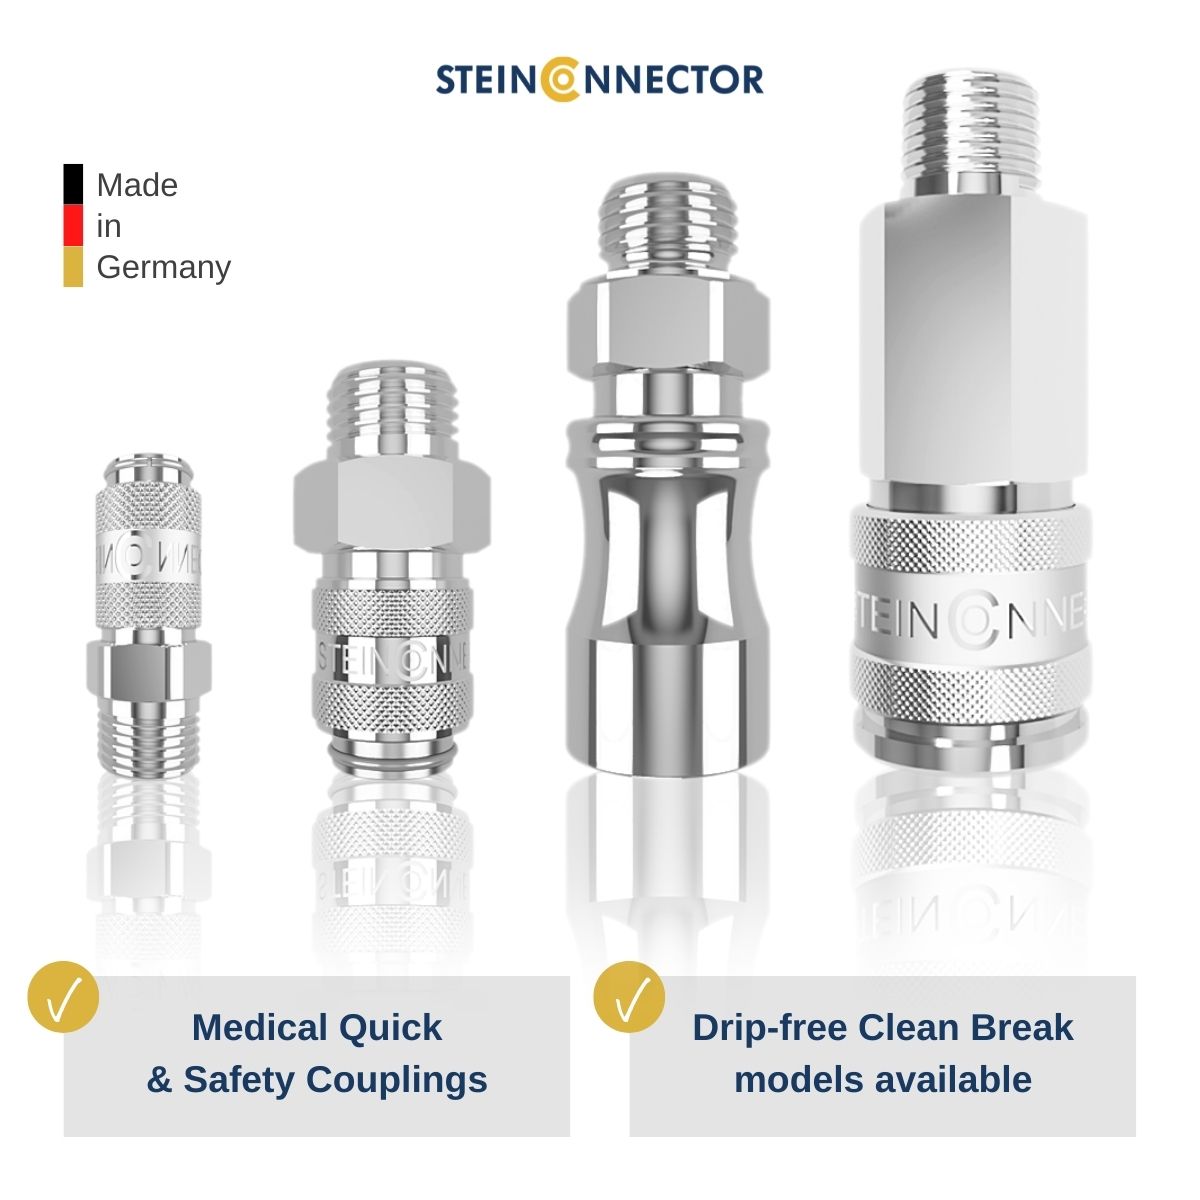 Clean Break & Flat Face couplings, dental couplings, sterile couplings, dry couplingsspecifically developed for medical technology - STEINCONNECTOR Medical couplings in premium quality